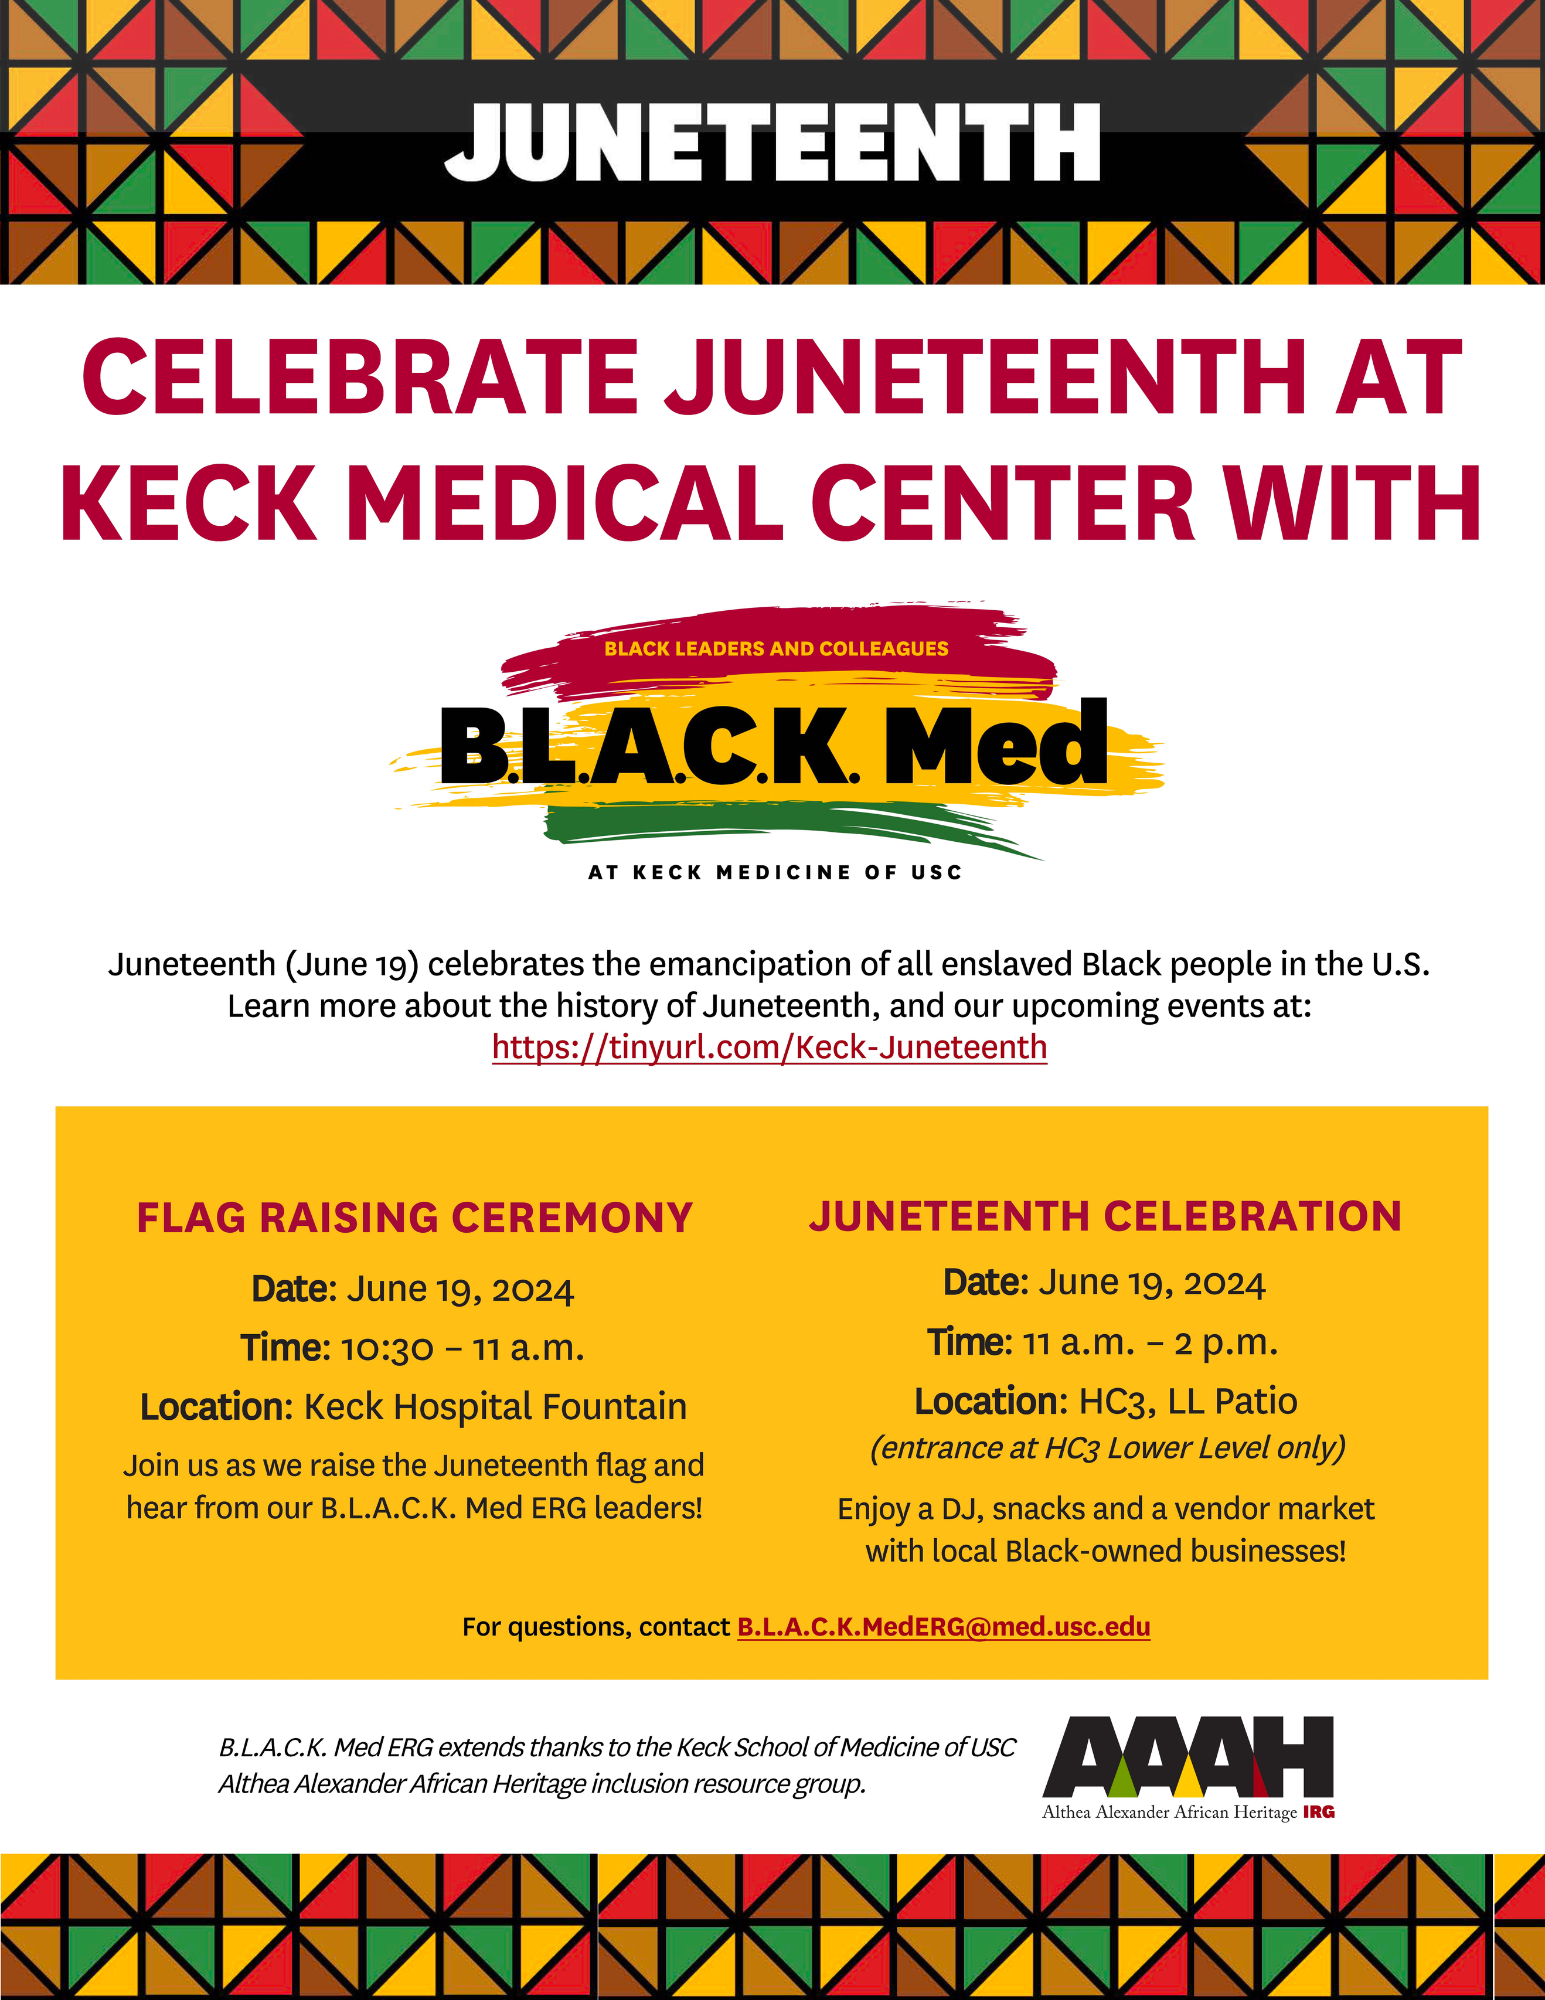 Flyer with information on Juneteenth celebration